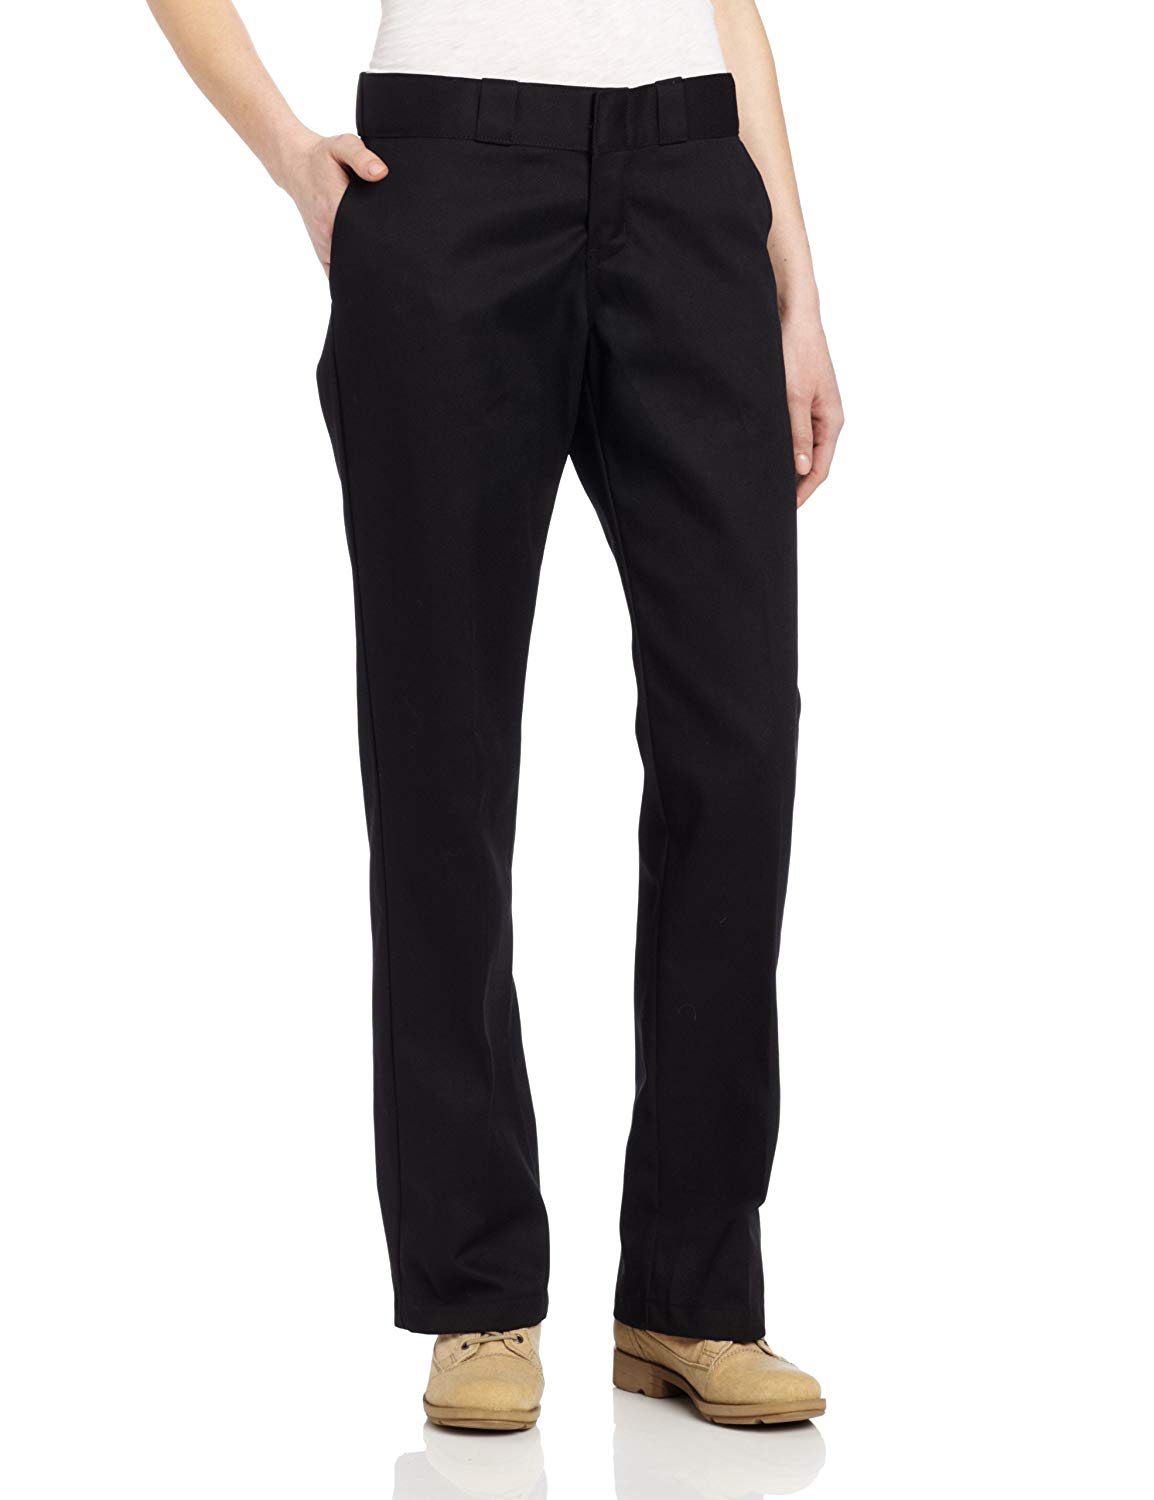 Dickies Women's Original Work Pant with Wrinkle And Stain, Black, Size ...